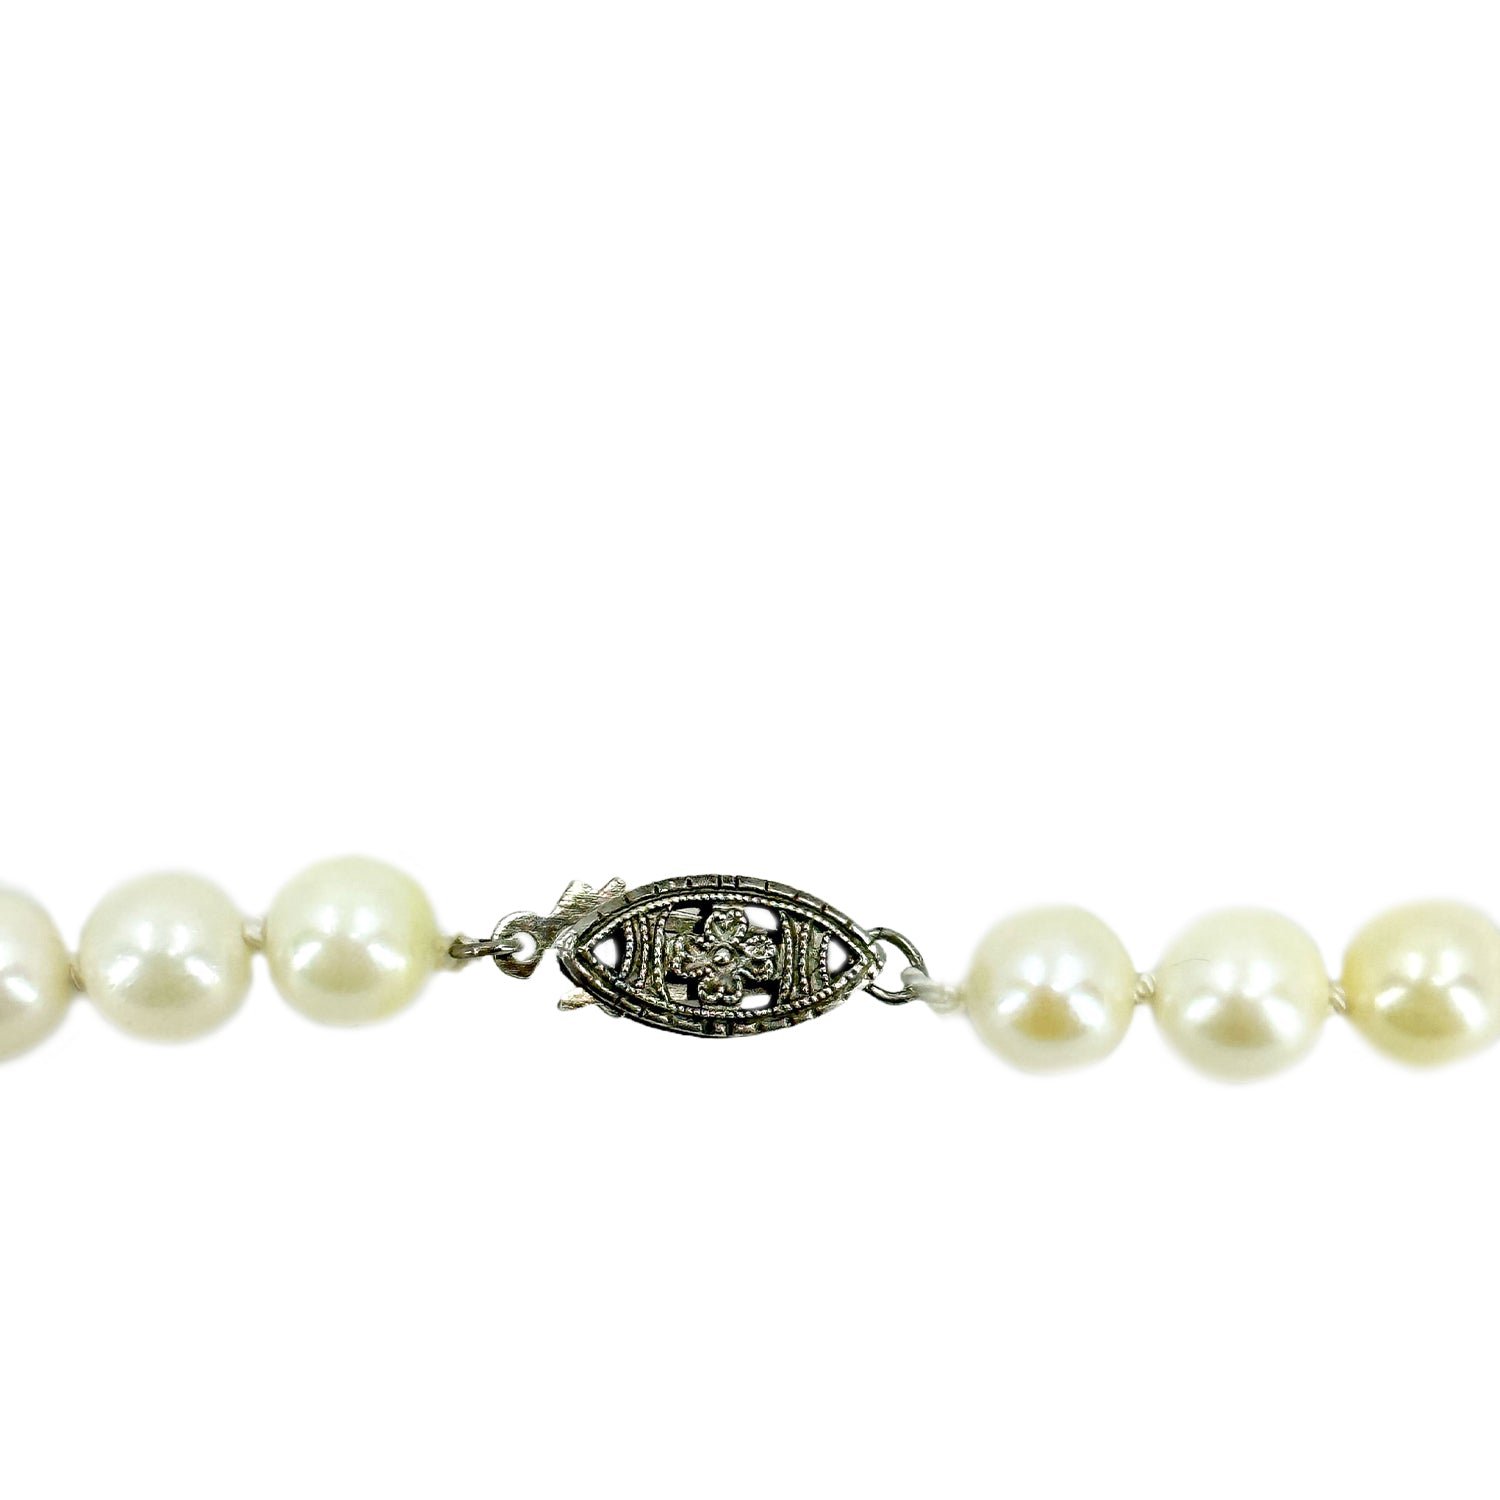 Floral Choker Japanese Saltwater Cultured Akoya Pearl Vintage Necklace - Sterling Silver 15.75 Inch